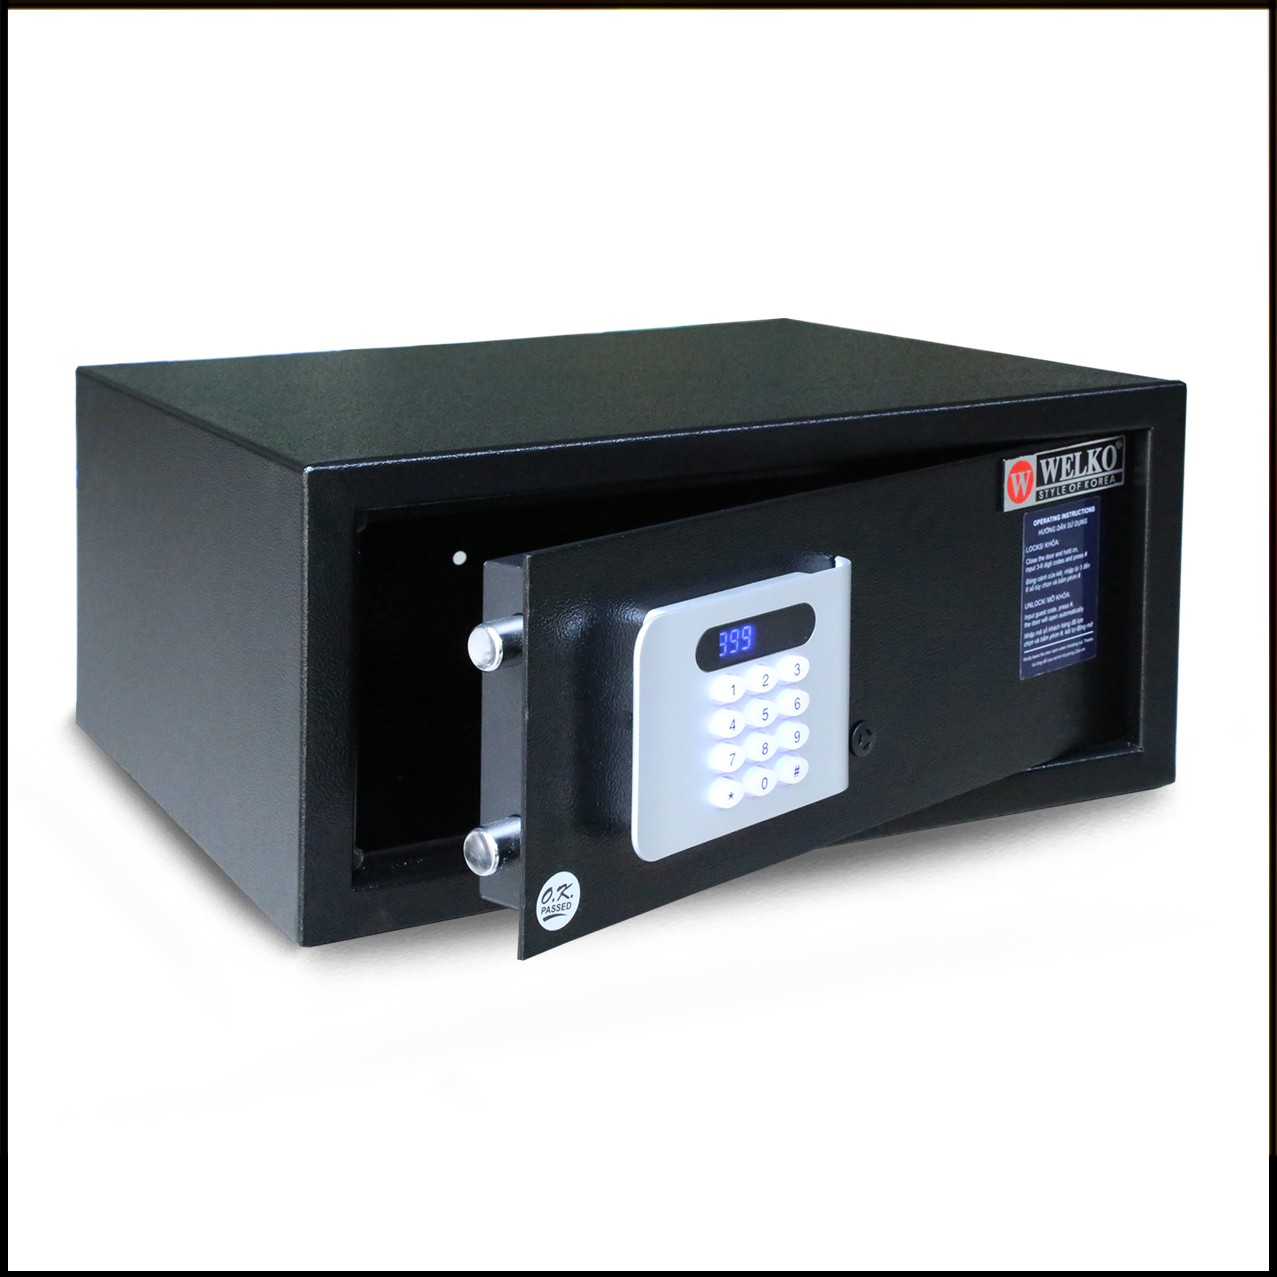 Hotel Safes - Manufacturers & Suppliers